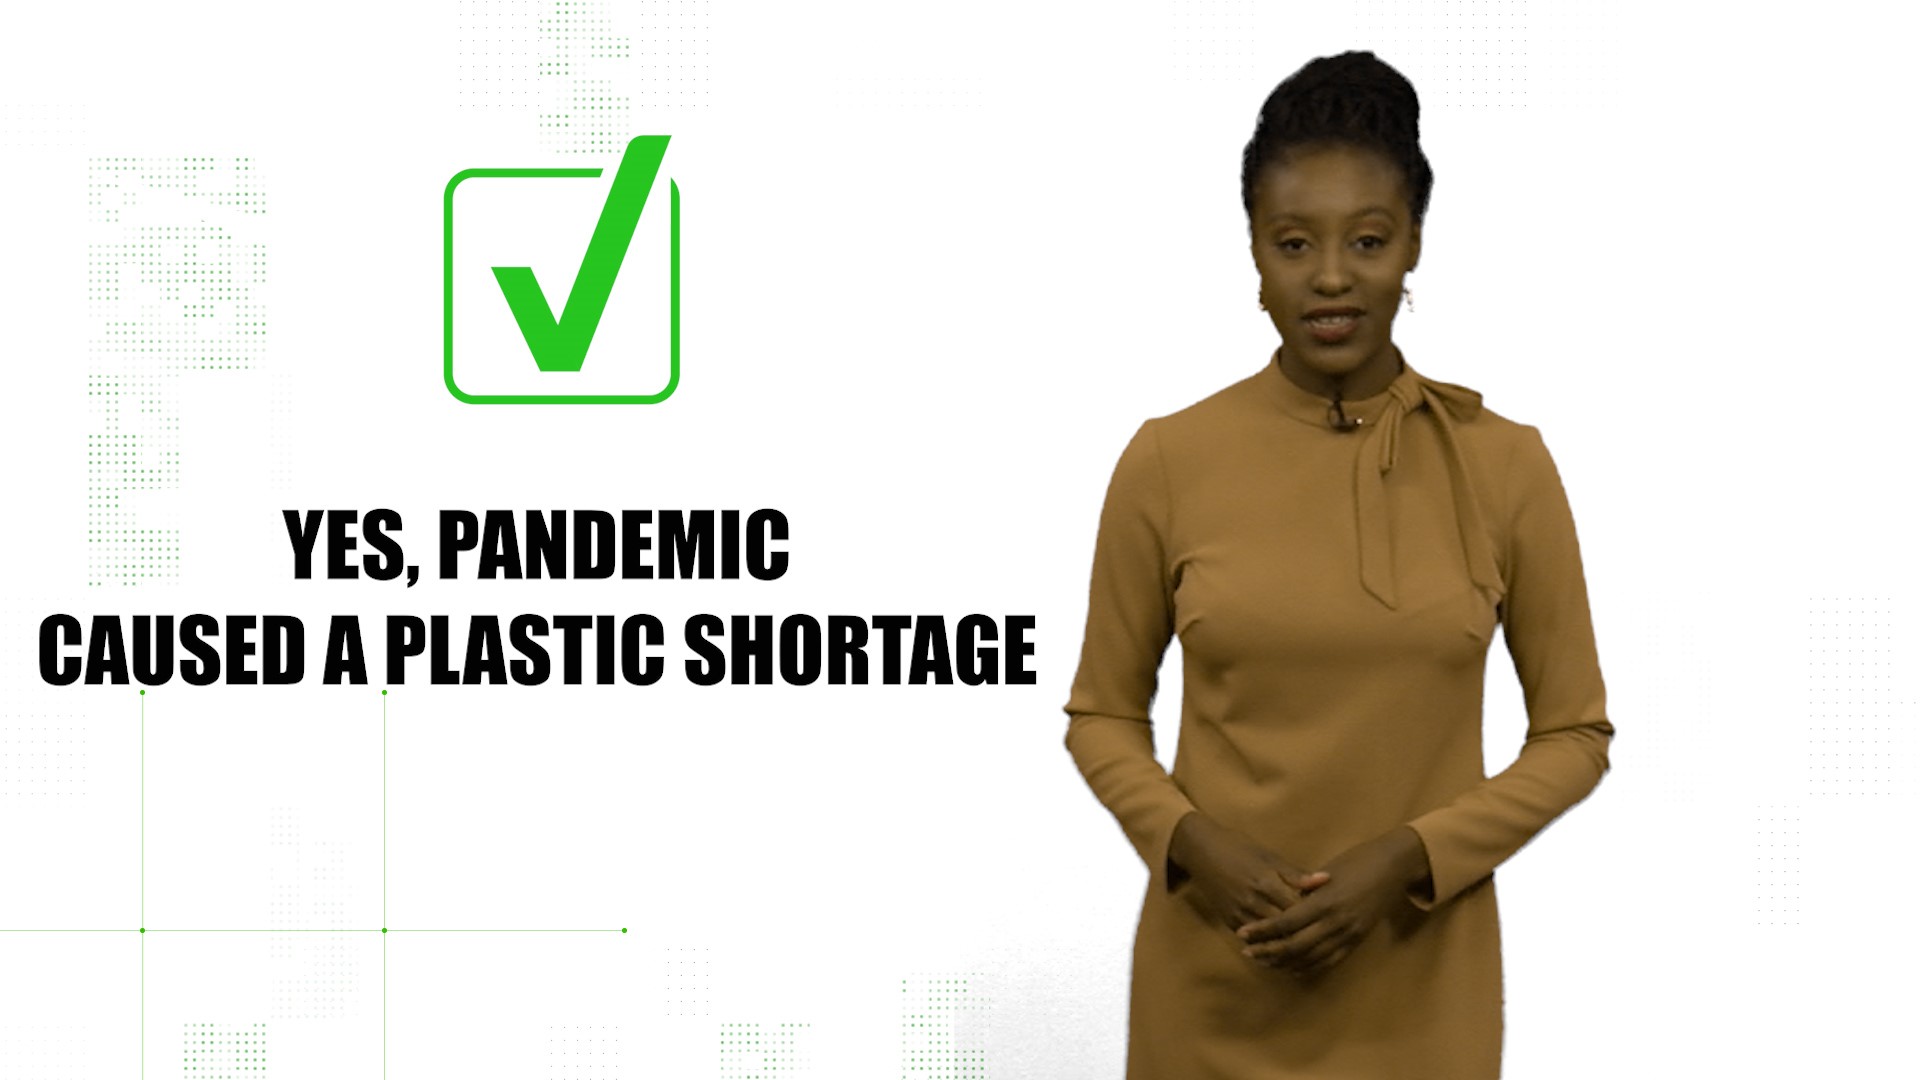 The pandemic isn't the only cause of plastic shortages.